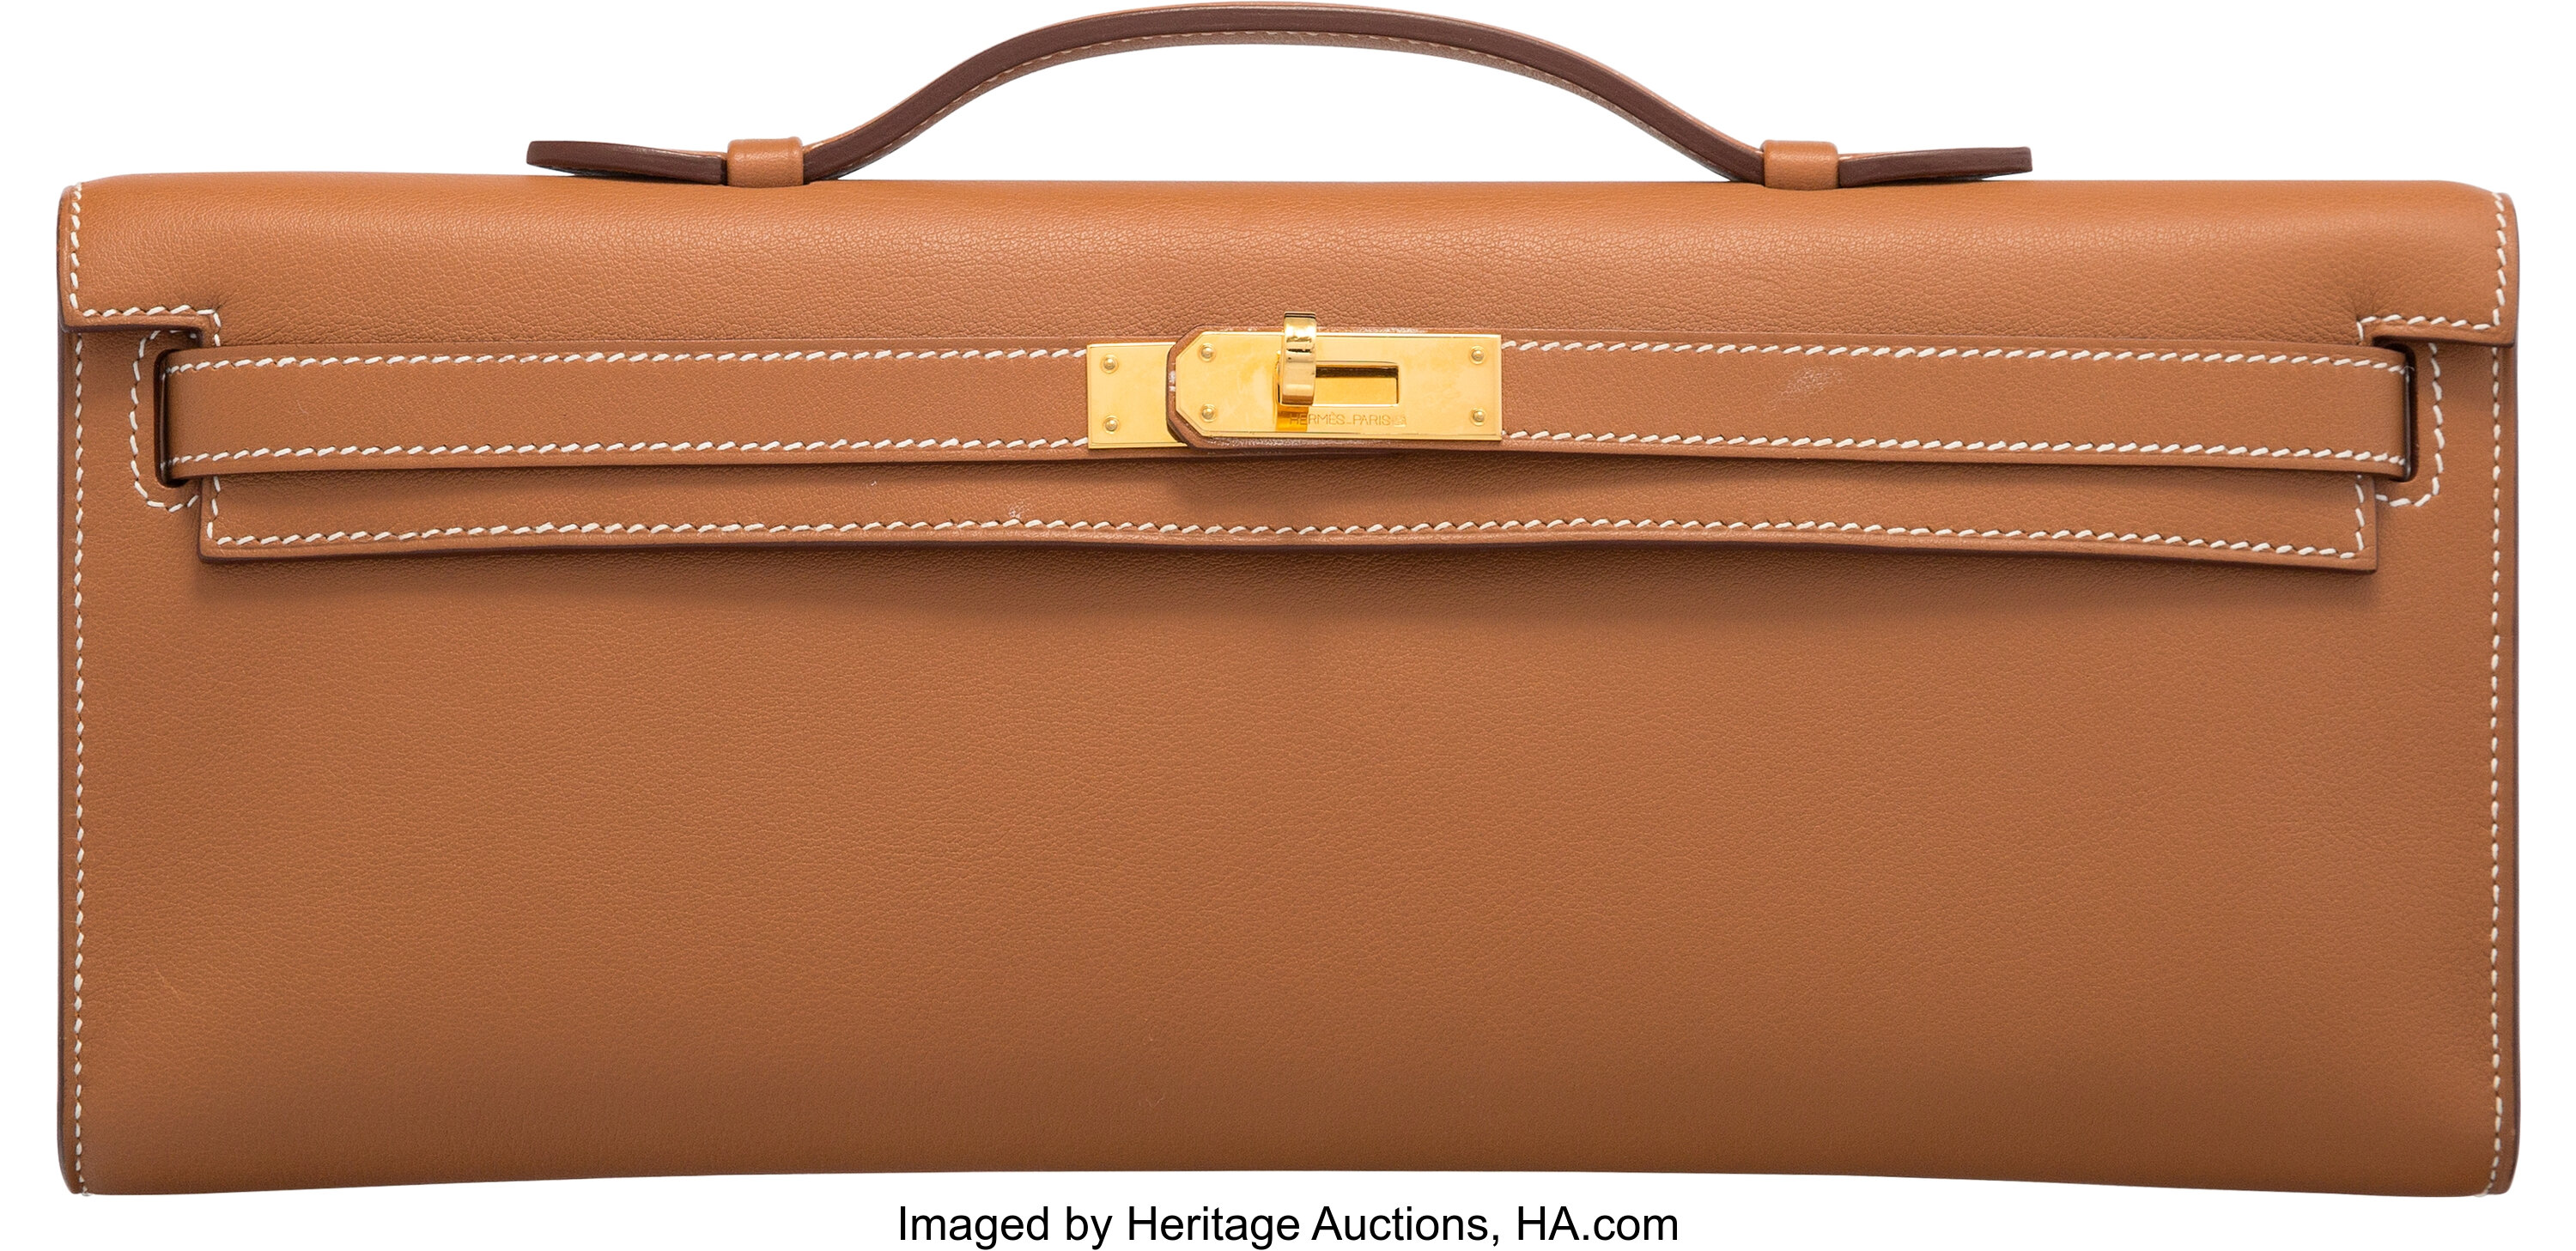 Hermès Gold Swift Leather Kelly Cut Clutch with Gold Hardware. O, Lot  #58302